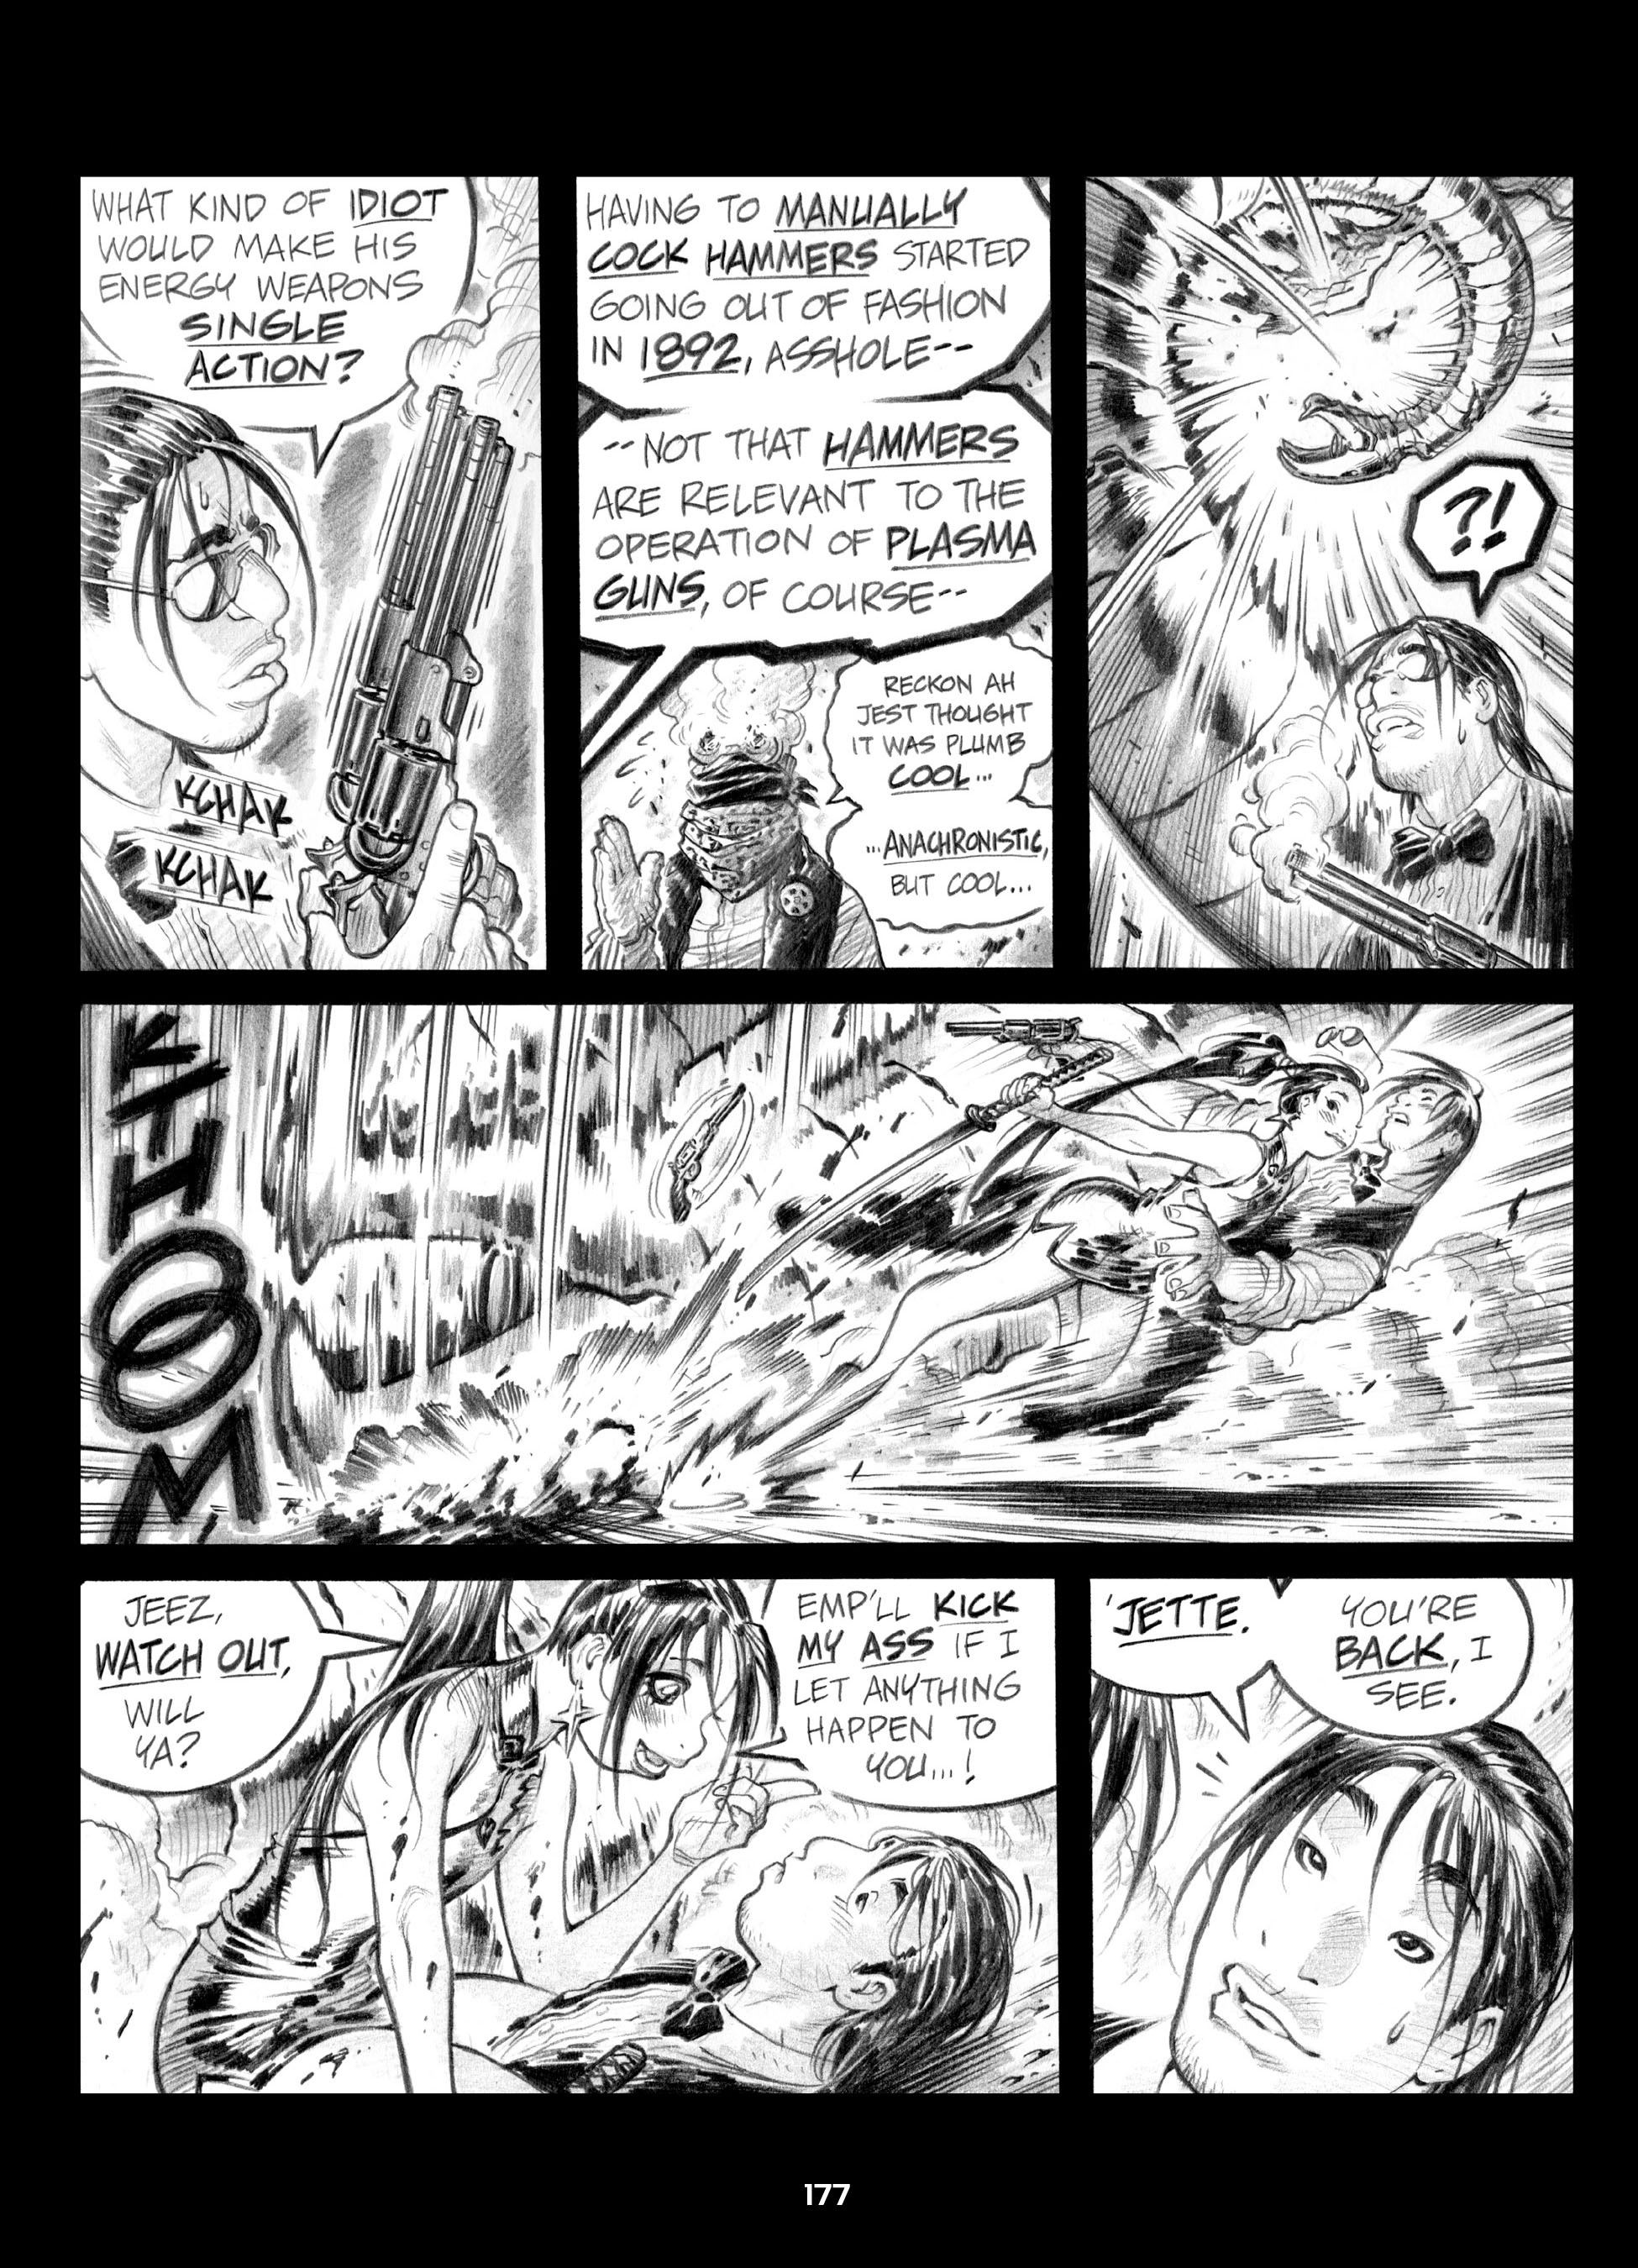 Read online Empowered comic -  Issue #4 - 177